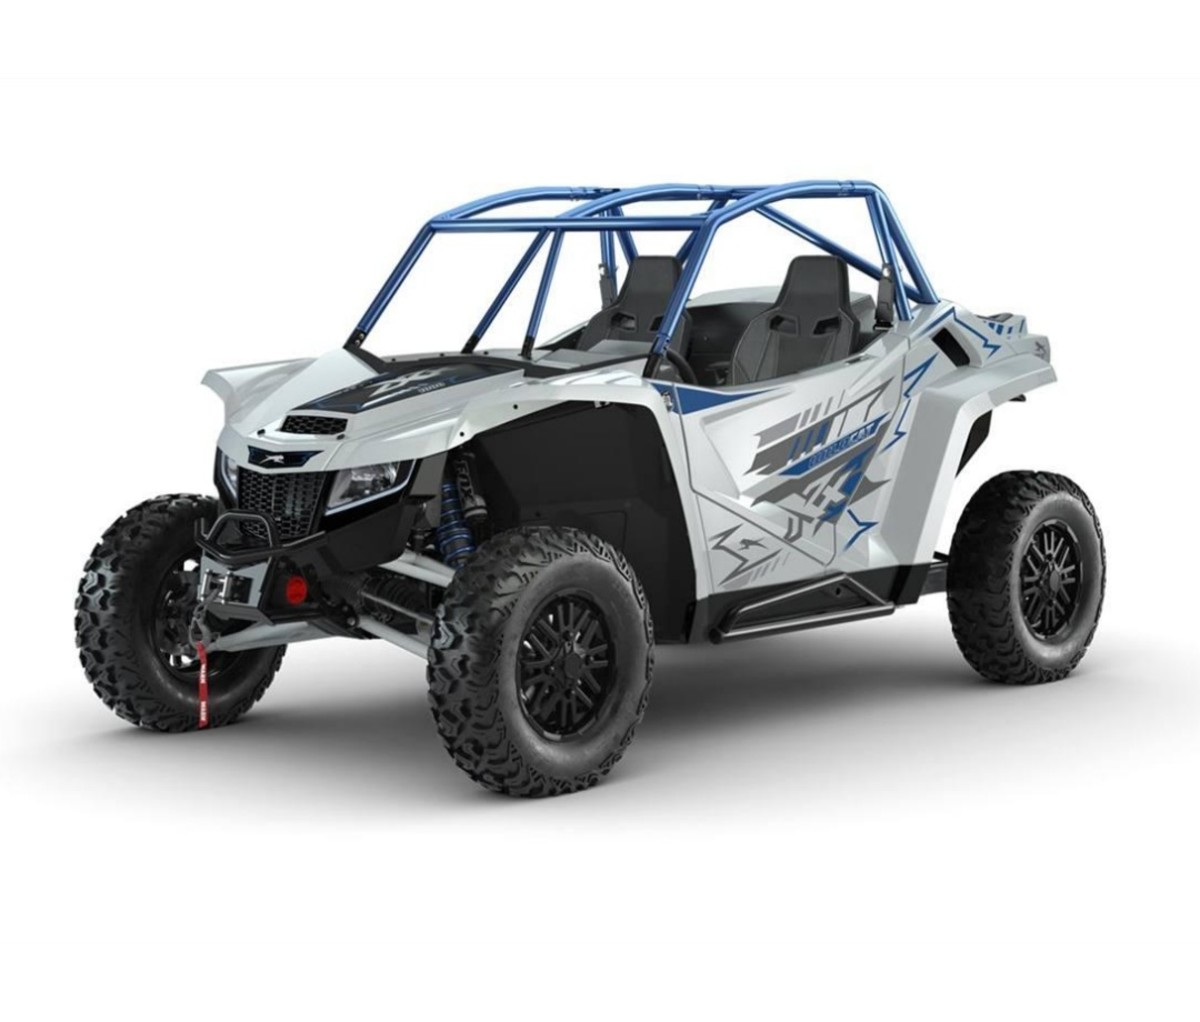 White and blue Arctic Cat Wildcat XX SE side-by-side UTV on a white background.